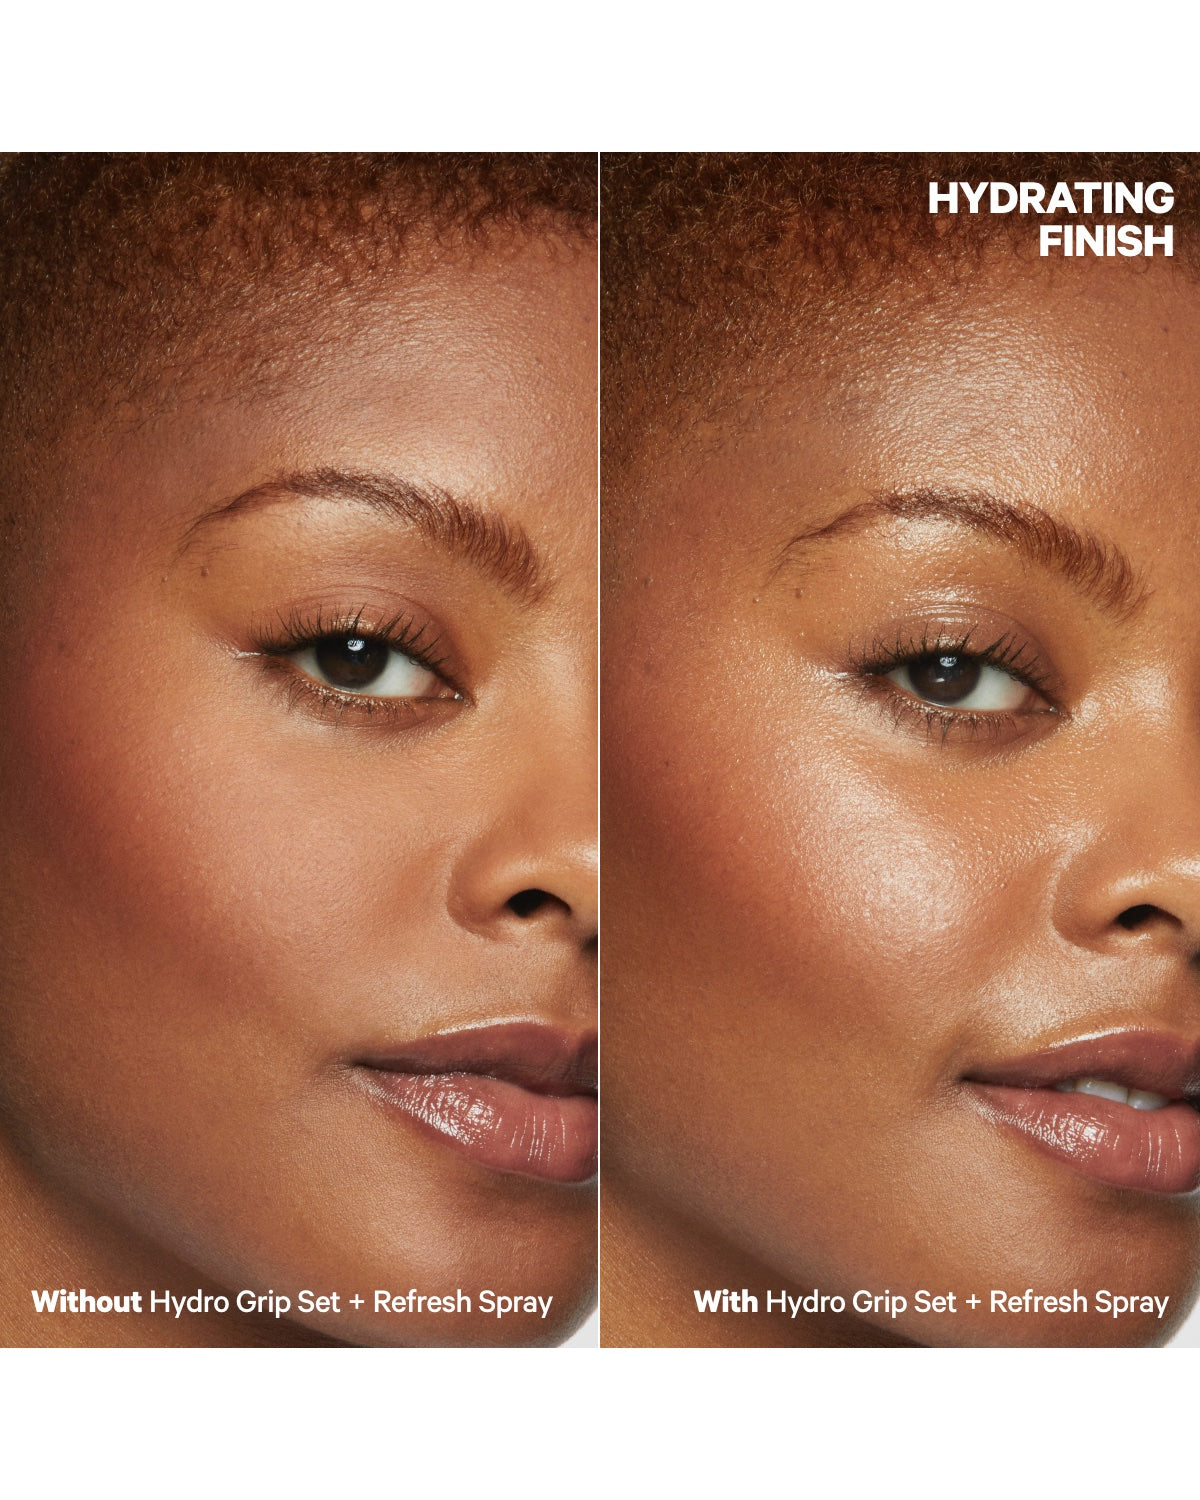 Hydro Grip Set + Refresh Spray Before and After 2 | Milk Makeup